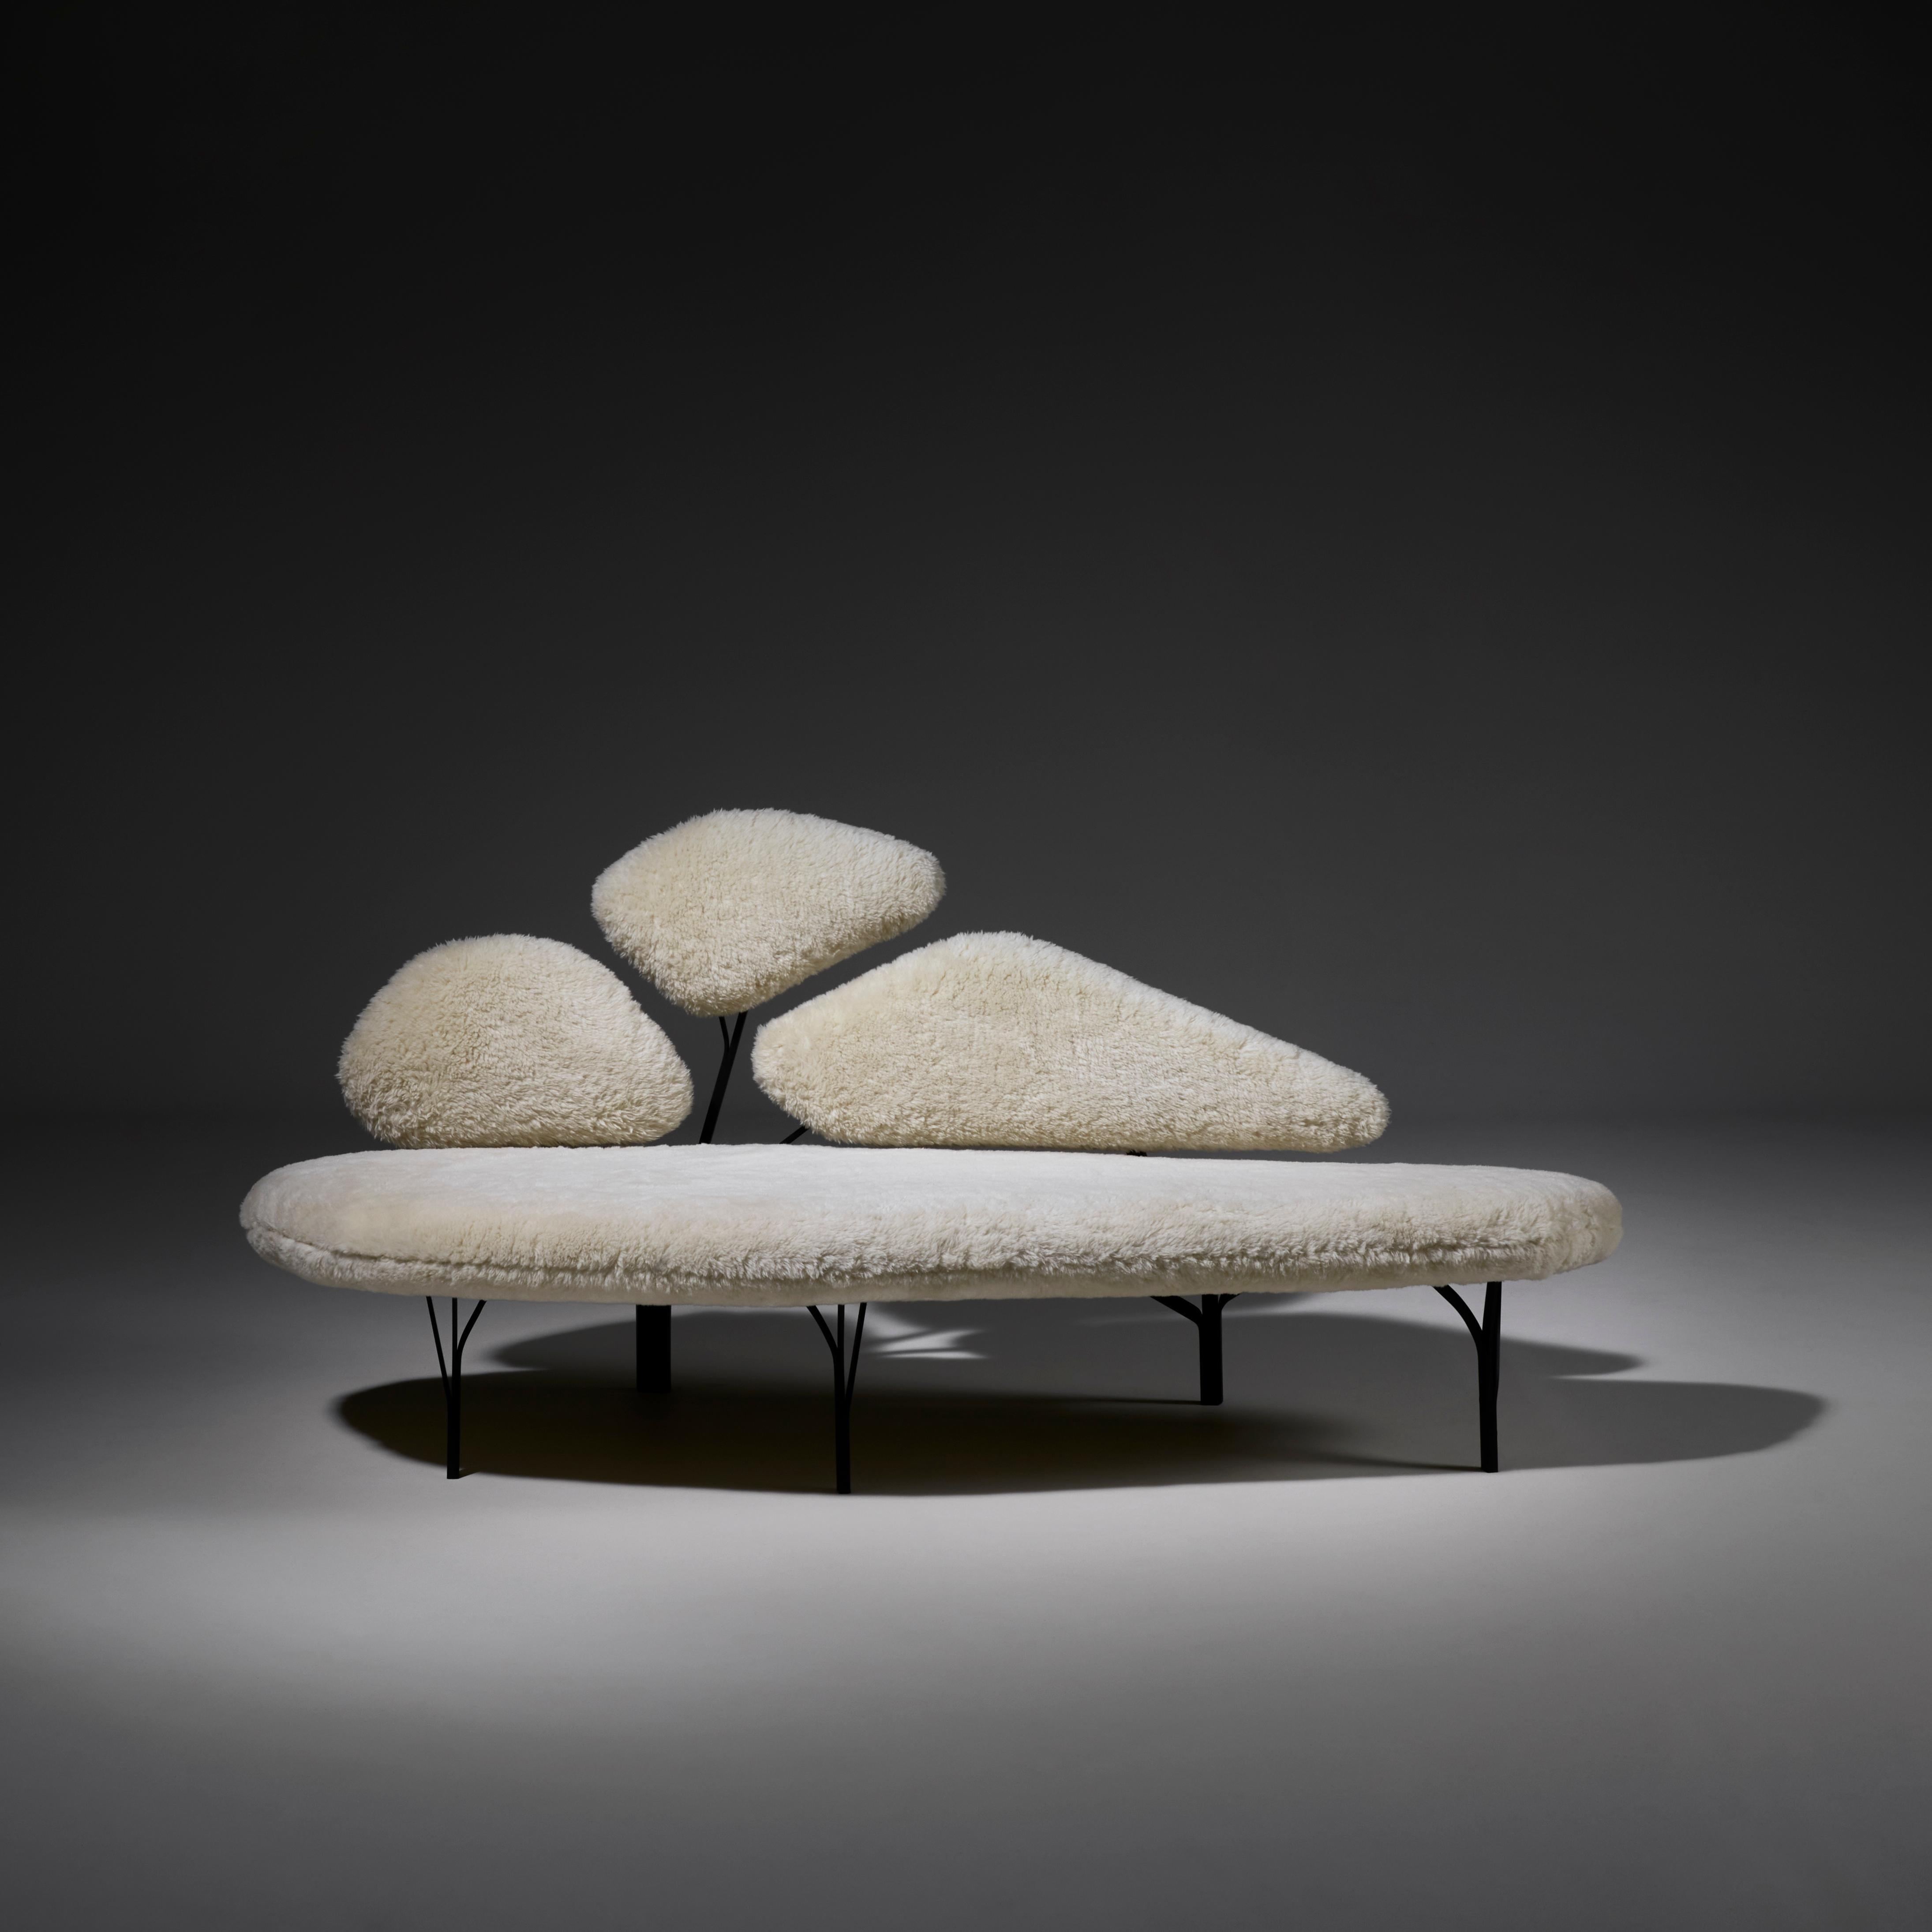 Borghese Sofa is a sculptural piece directly inspired and named after the pine trees of the Villa Borghese gardens in Roma.
The characteristic network of branches is translated as a graphic steel framework to support a trio of cushion.
The